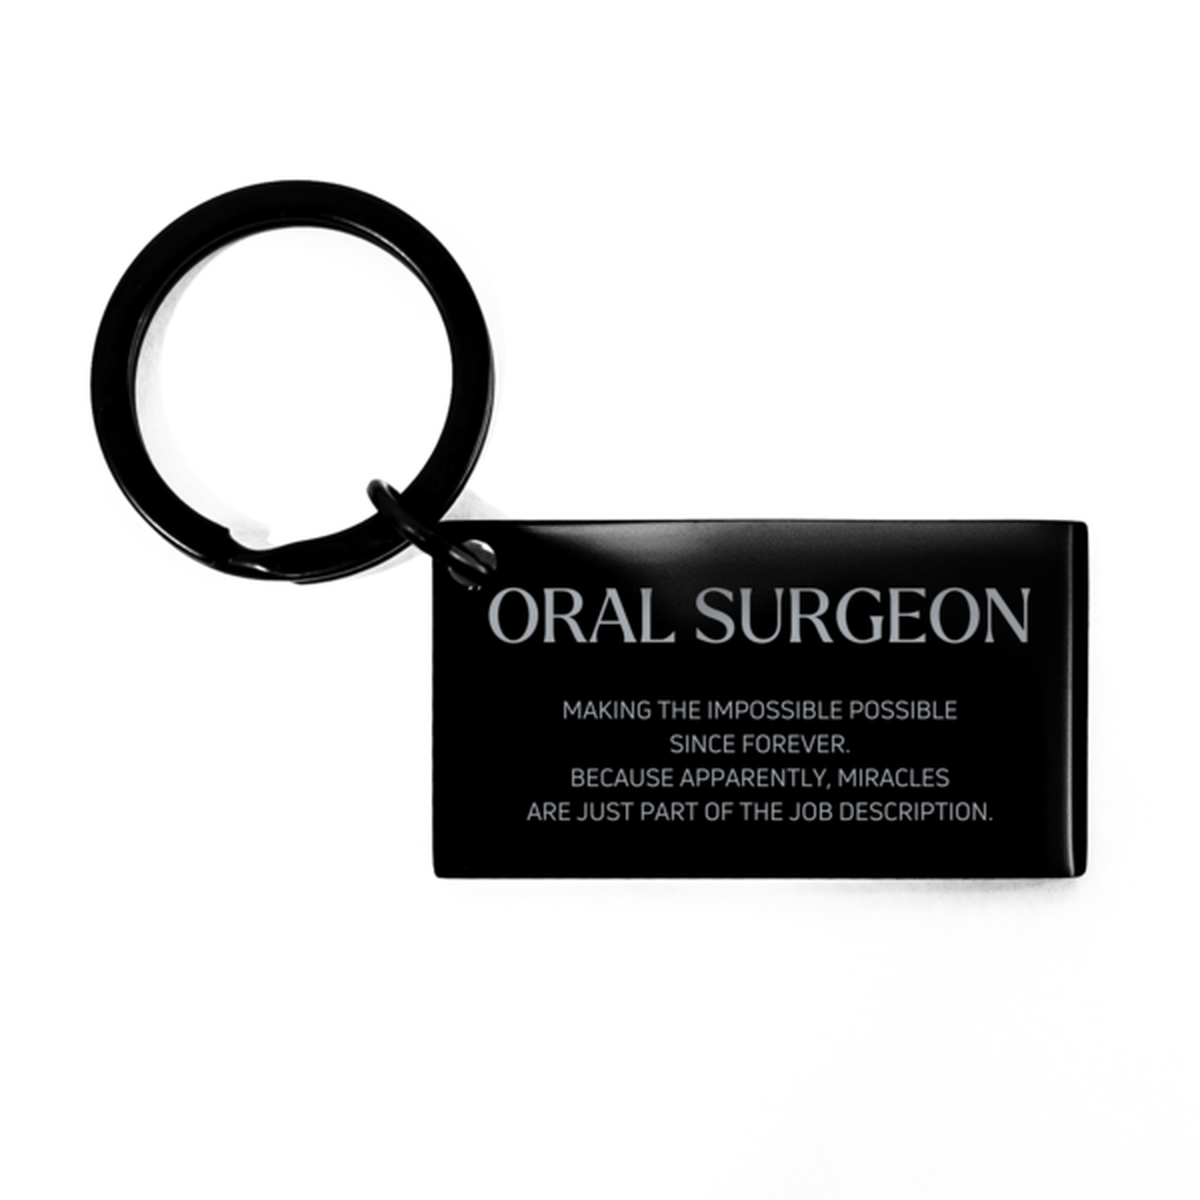 Funny Oral Surgeon Gifts, Miracles are just part of the job description, Inspirational Birthday Keychain For Oral Surgeon, Men, Women, Coworkers, Friends, Boss